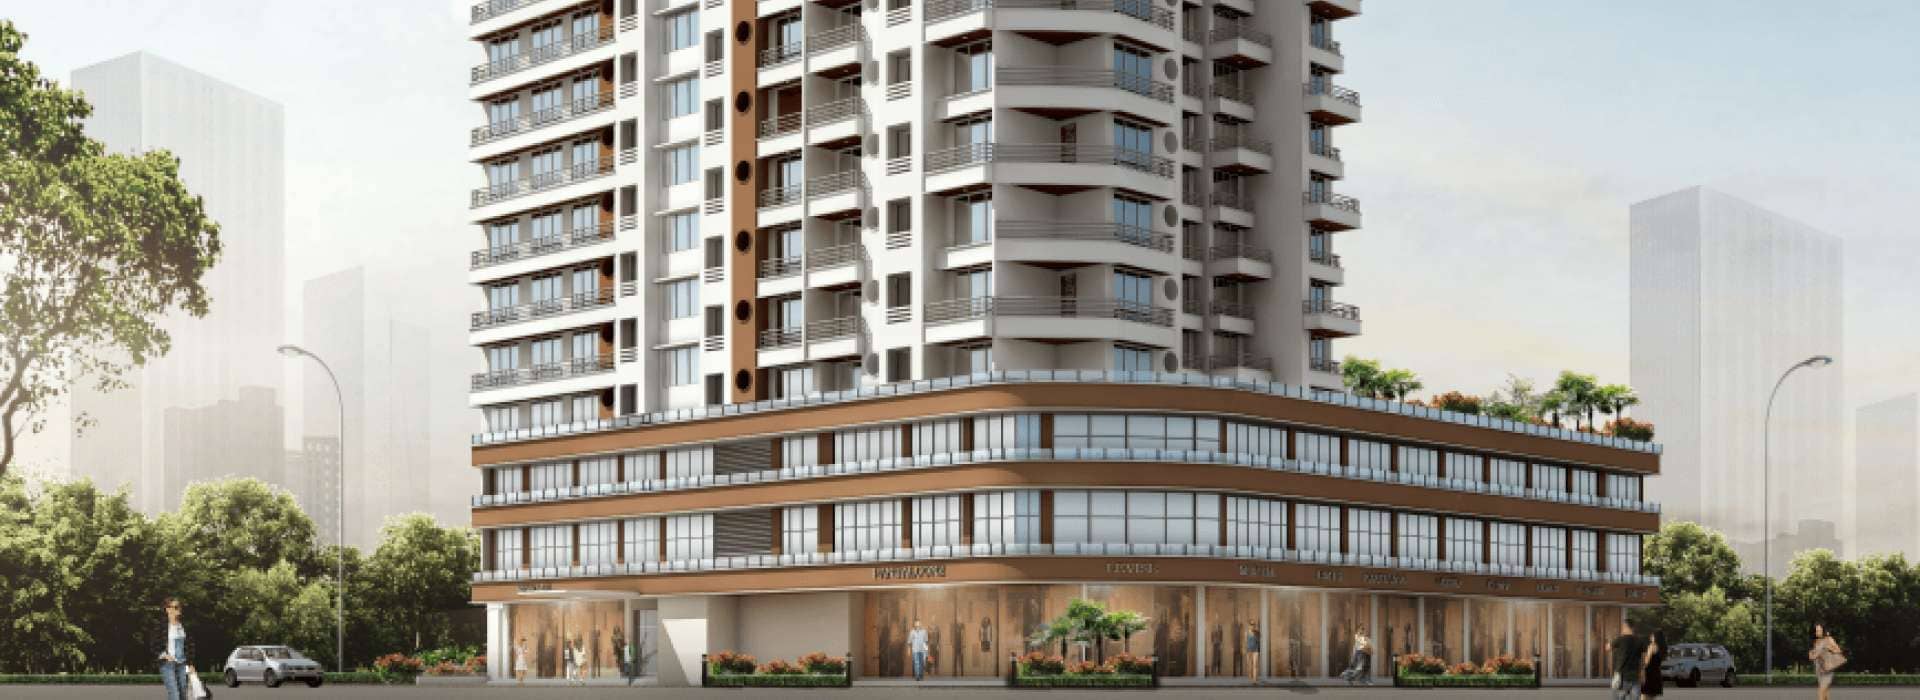 Tycoons Square Kalyan West New Residential Project